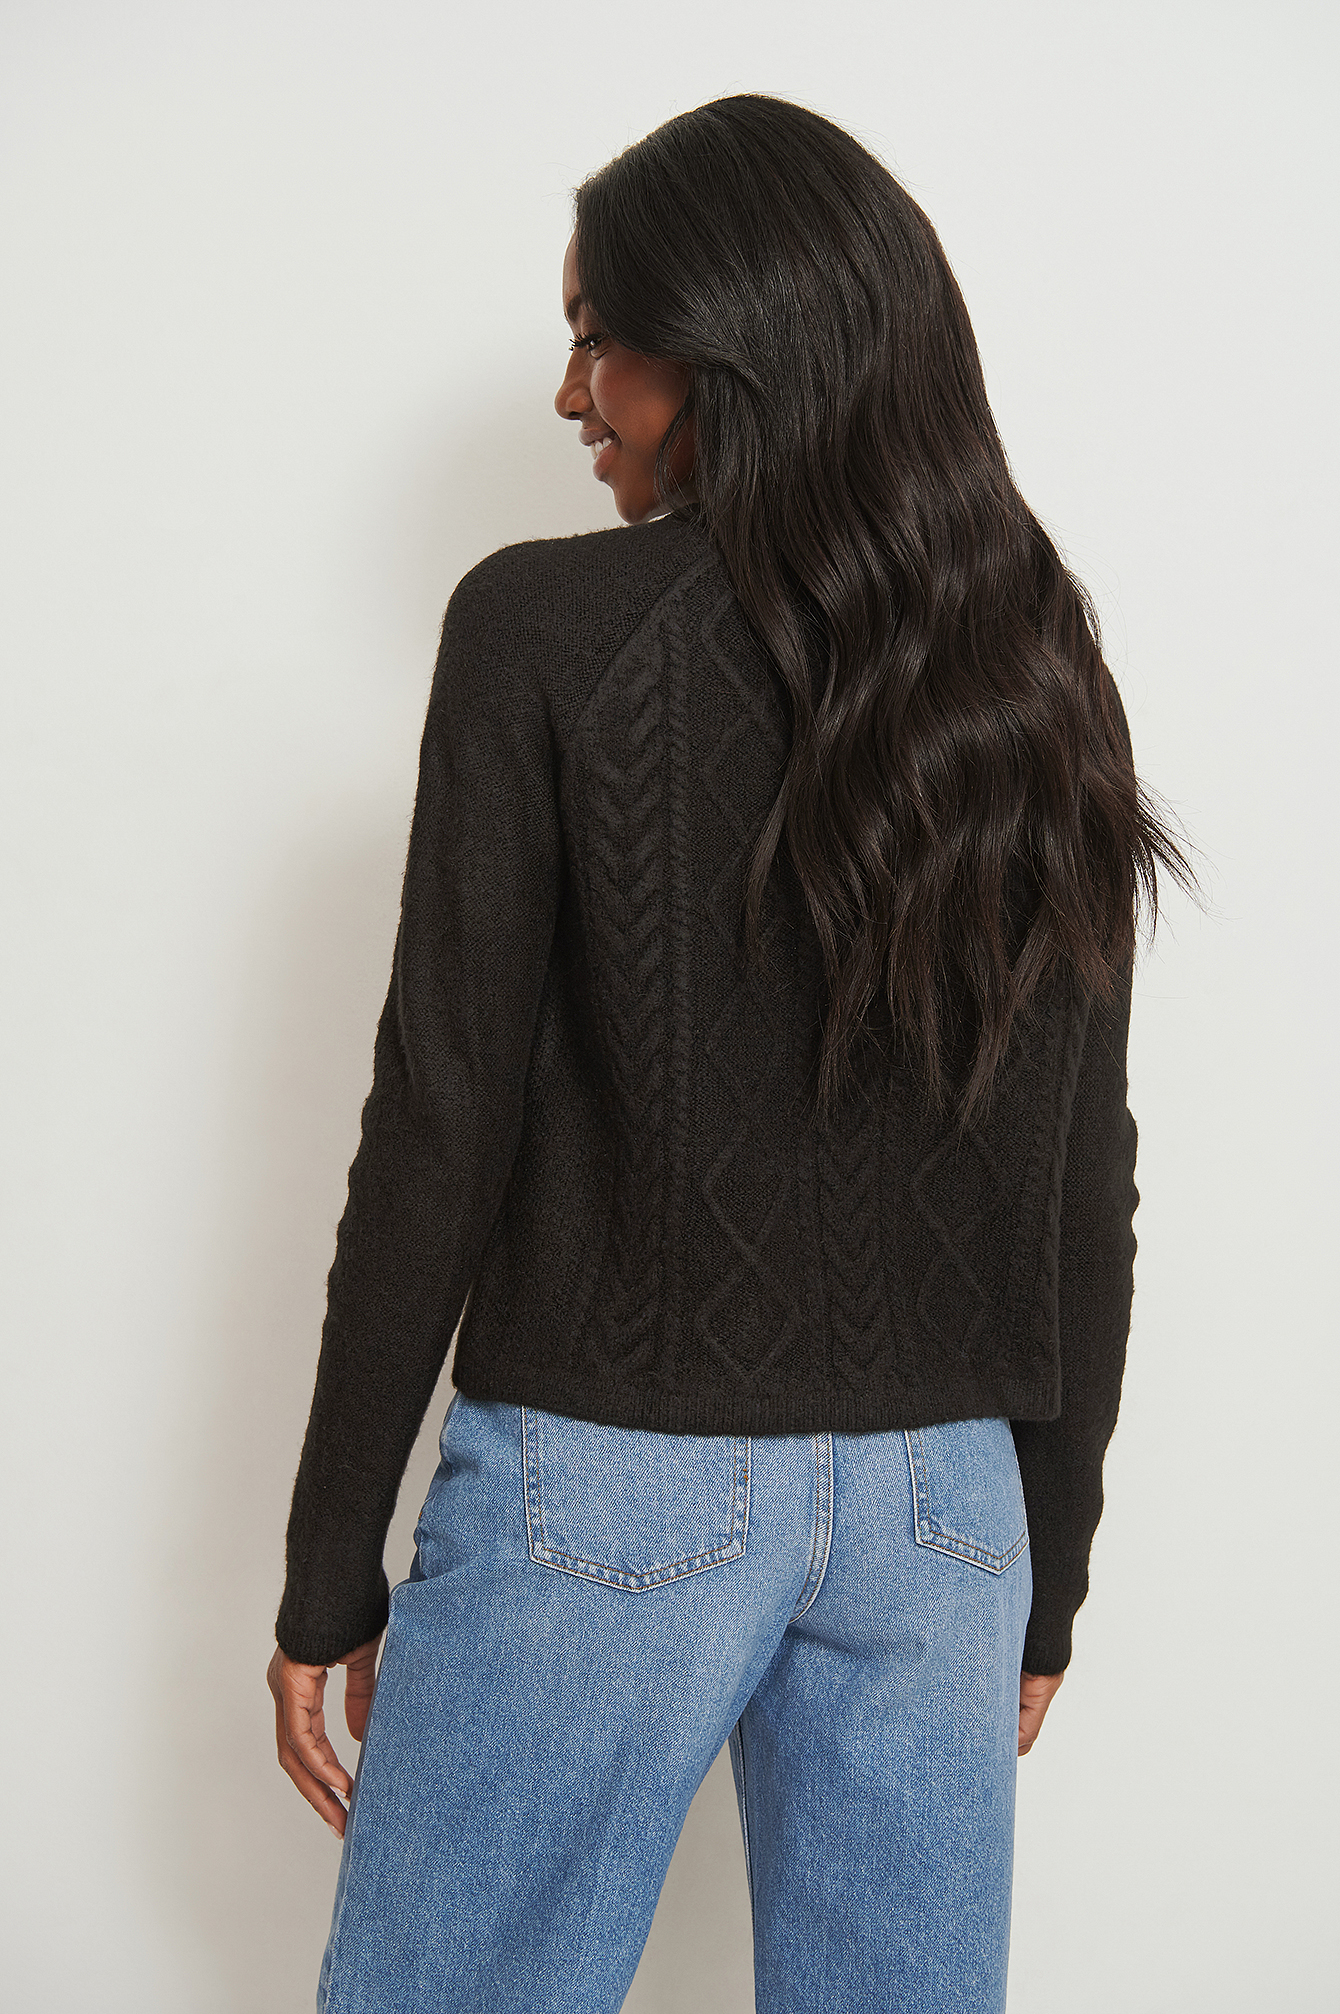 Black Cable Knitted Round Neck Sweater